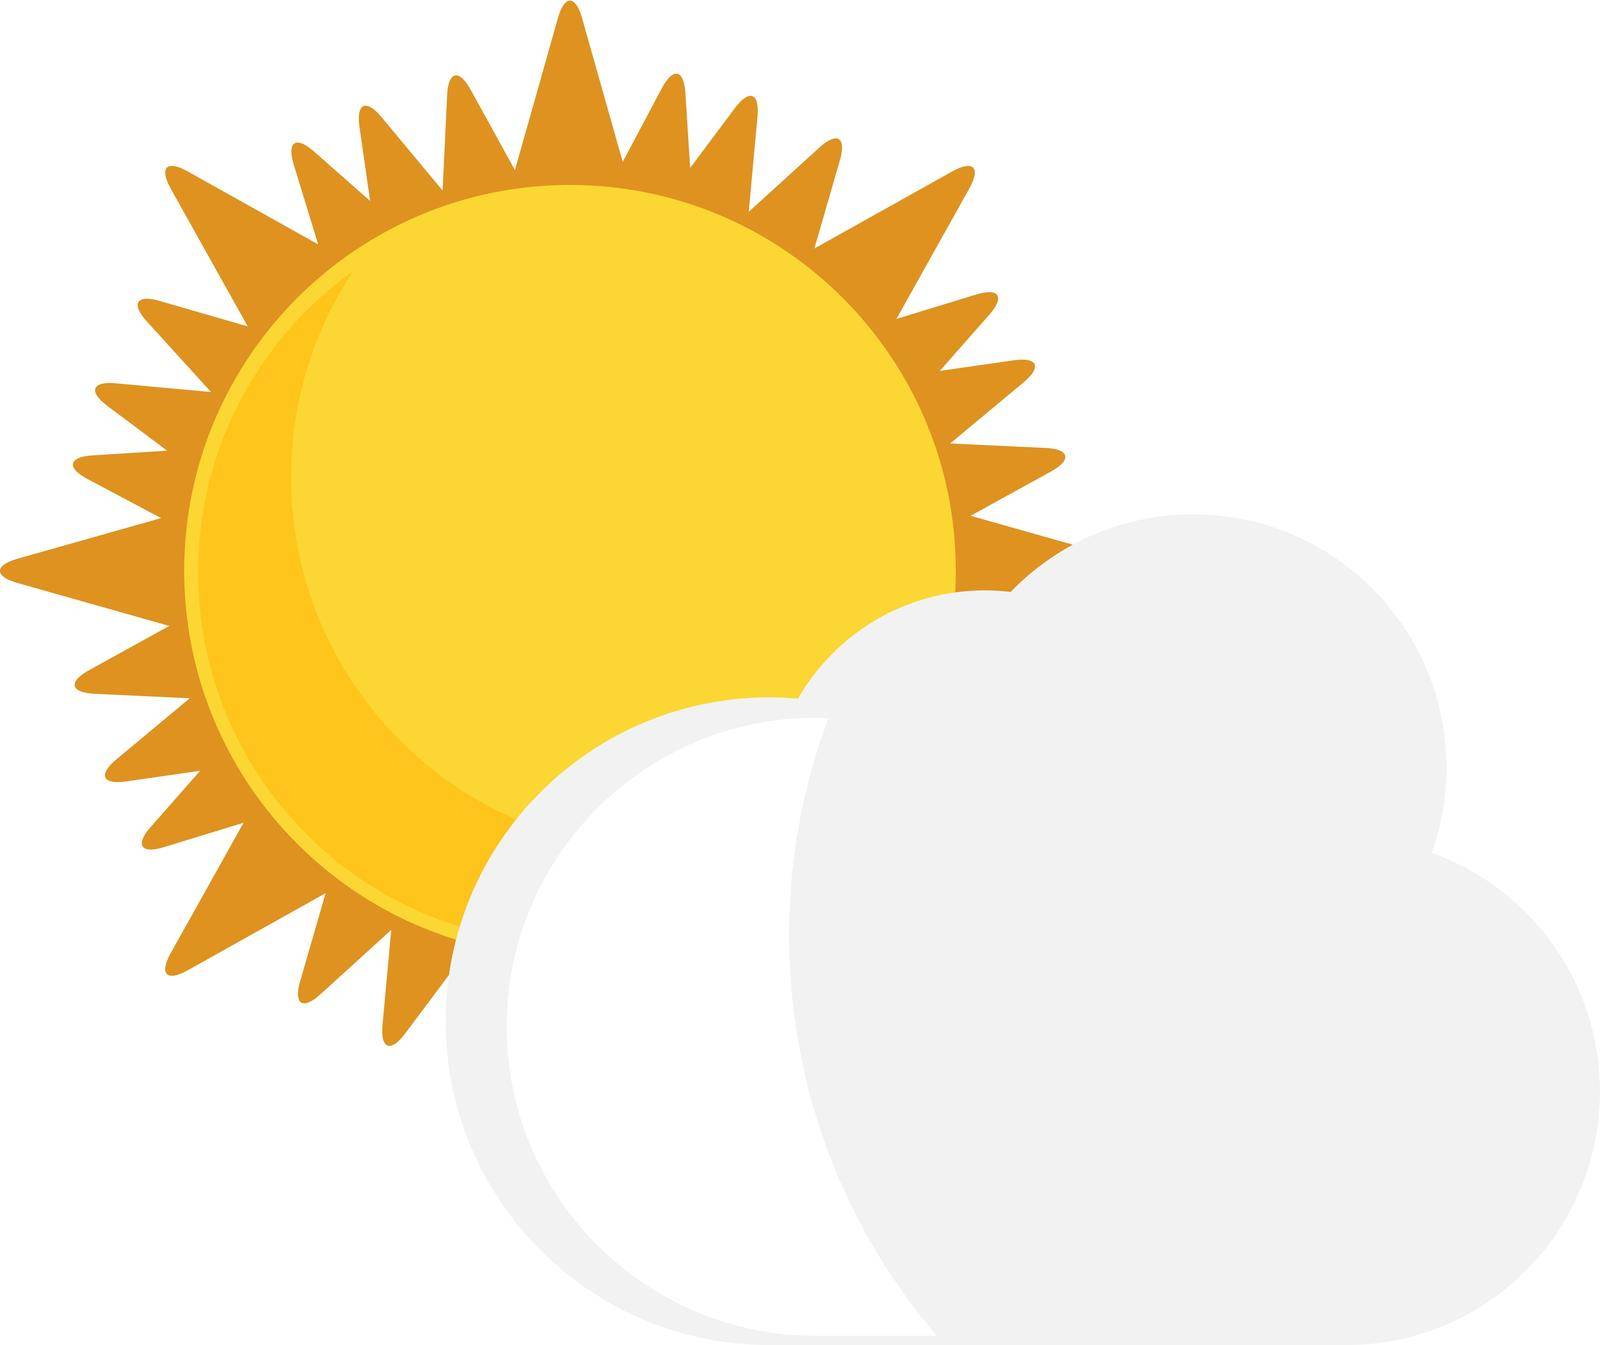 Sun and cloud. Cloudy weather symbol. Forecast icon by ONYXprj